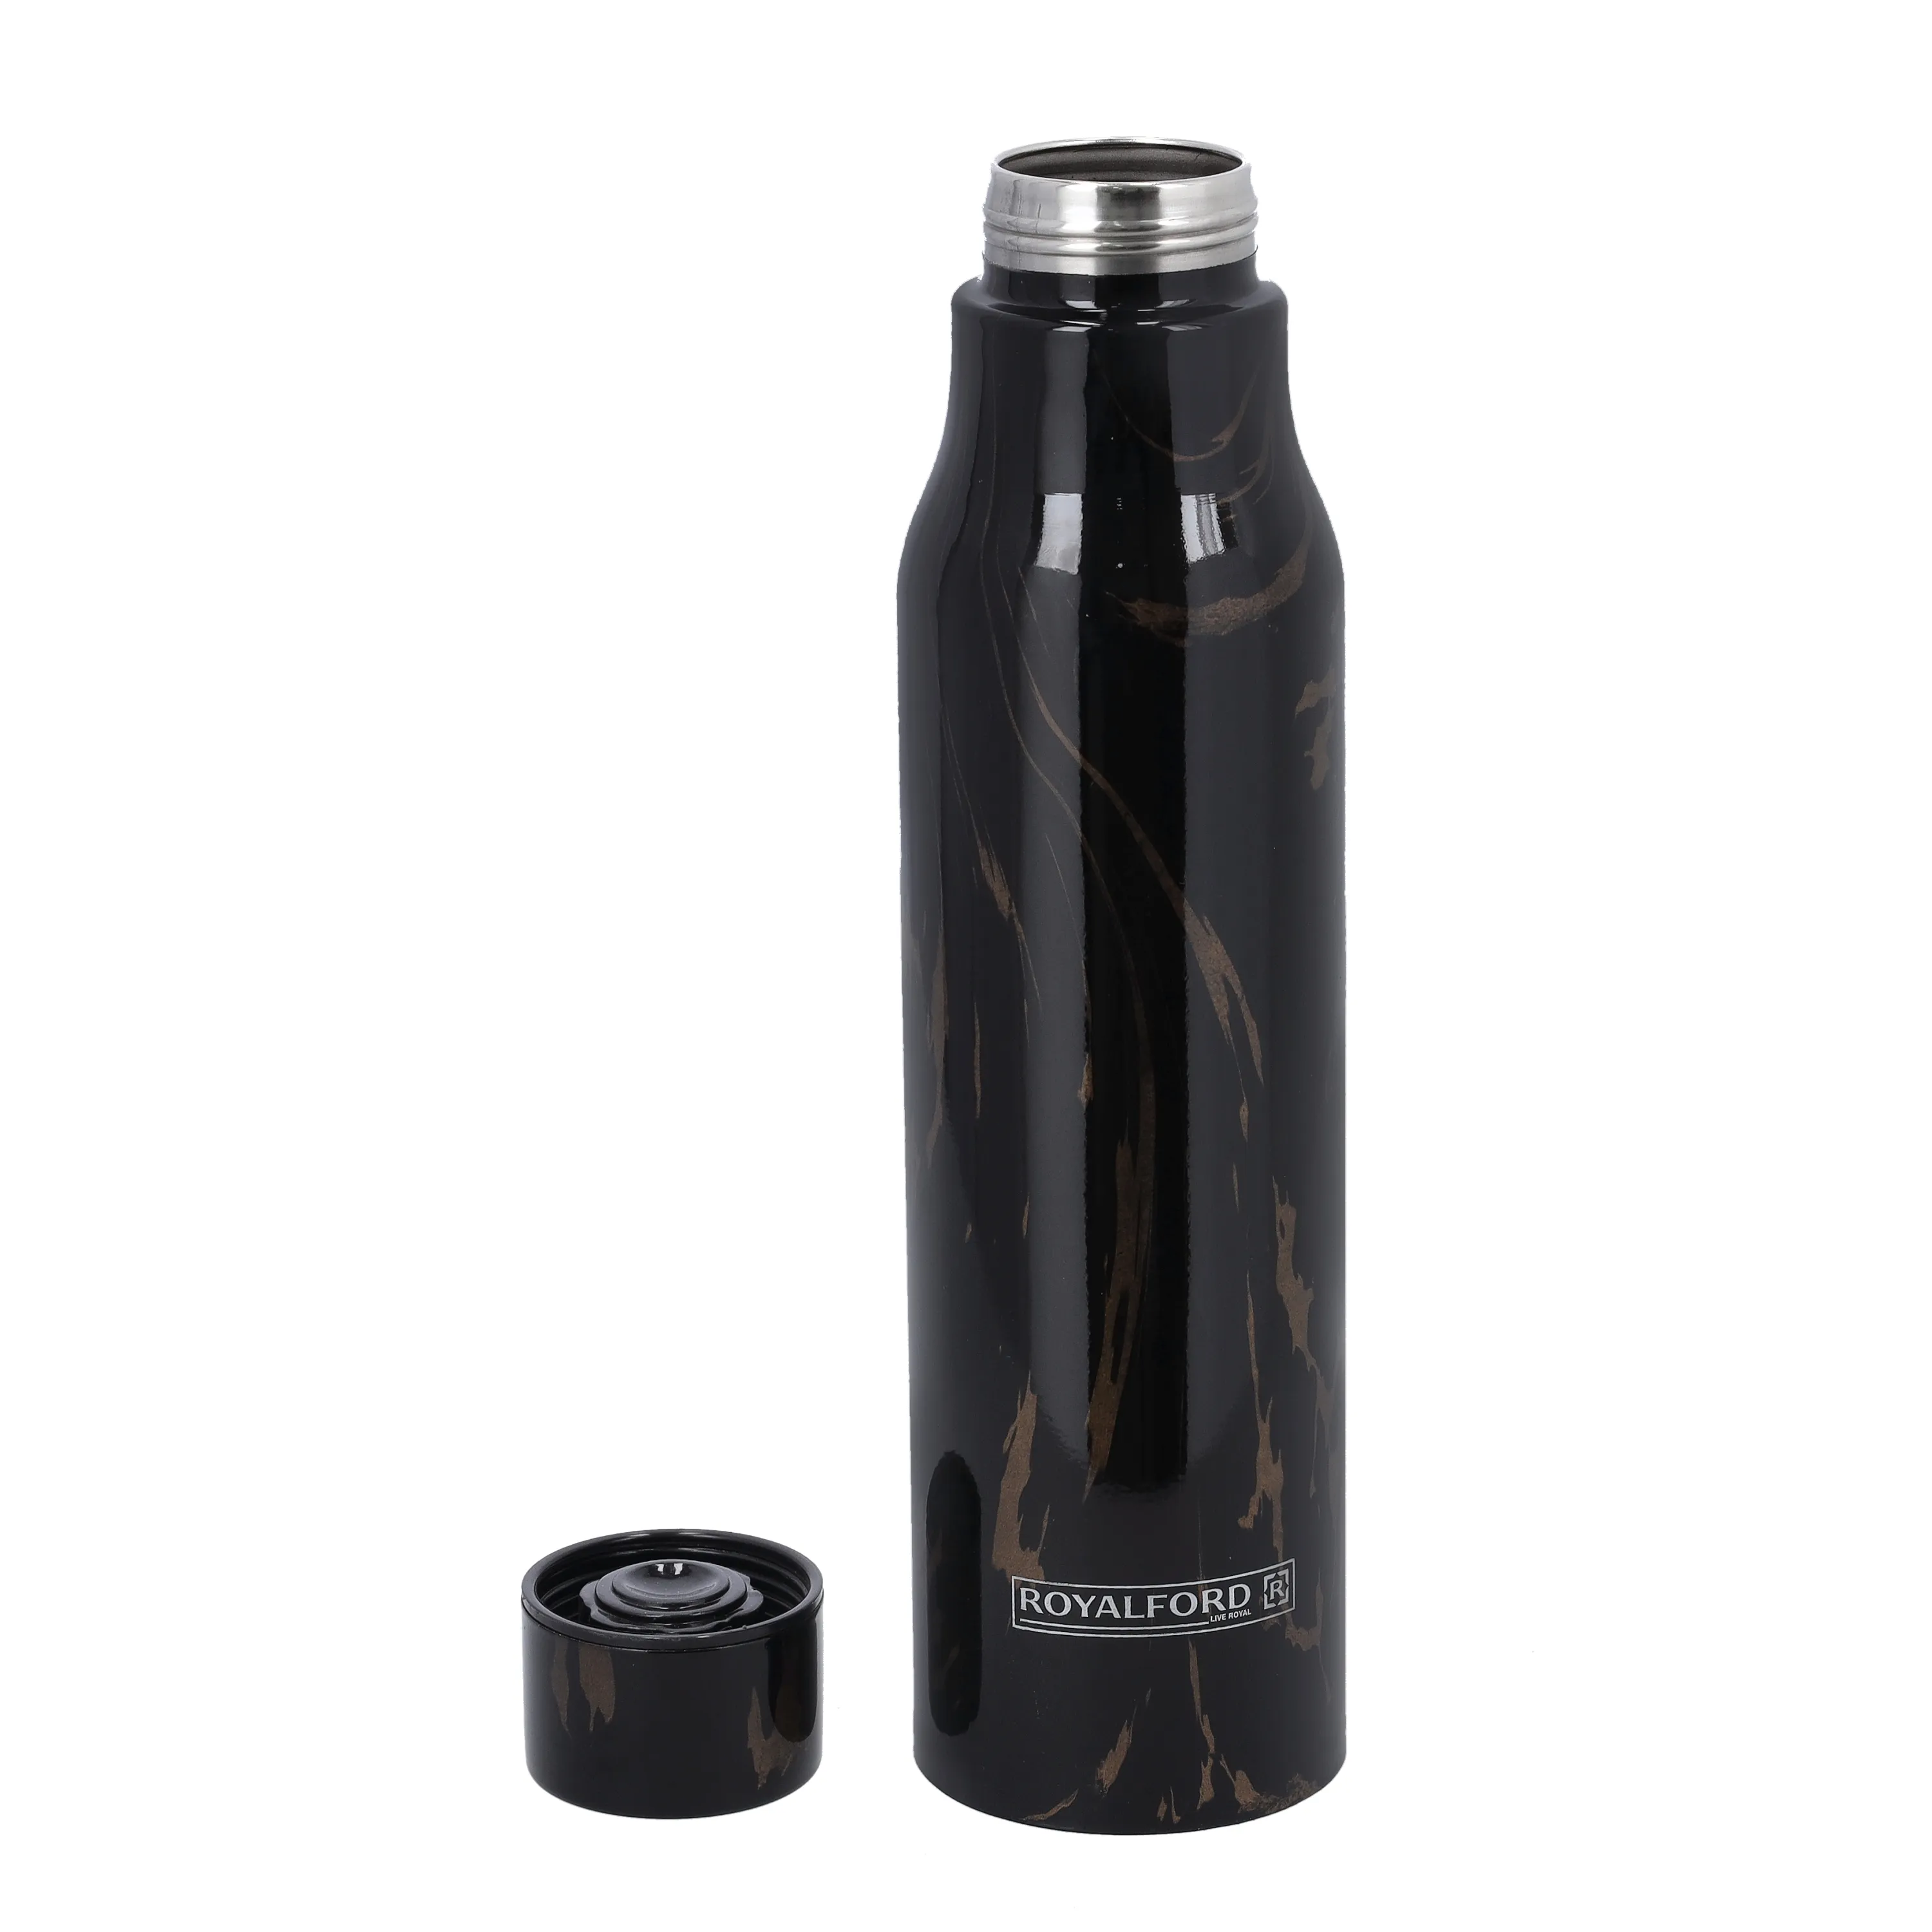 Royalford Stainless Steel Water Bottle, Silicon Sealing Ring, RF10019 Odour Free 1000ml Durable Body Ideal for Hiking, Camping, Office and School Purpose Preserve Flavour and Freshness